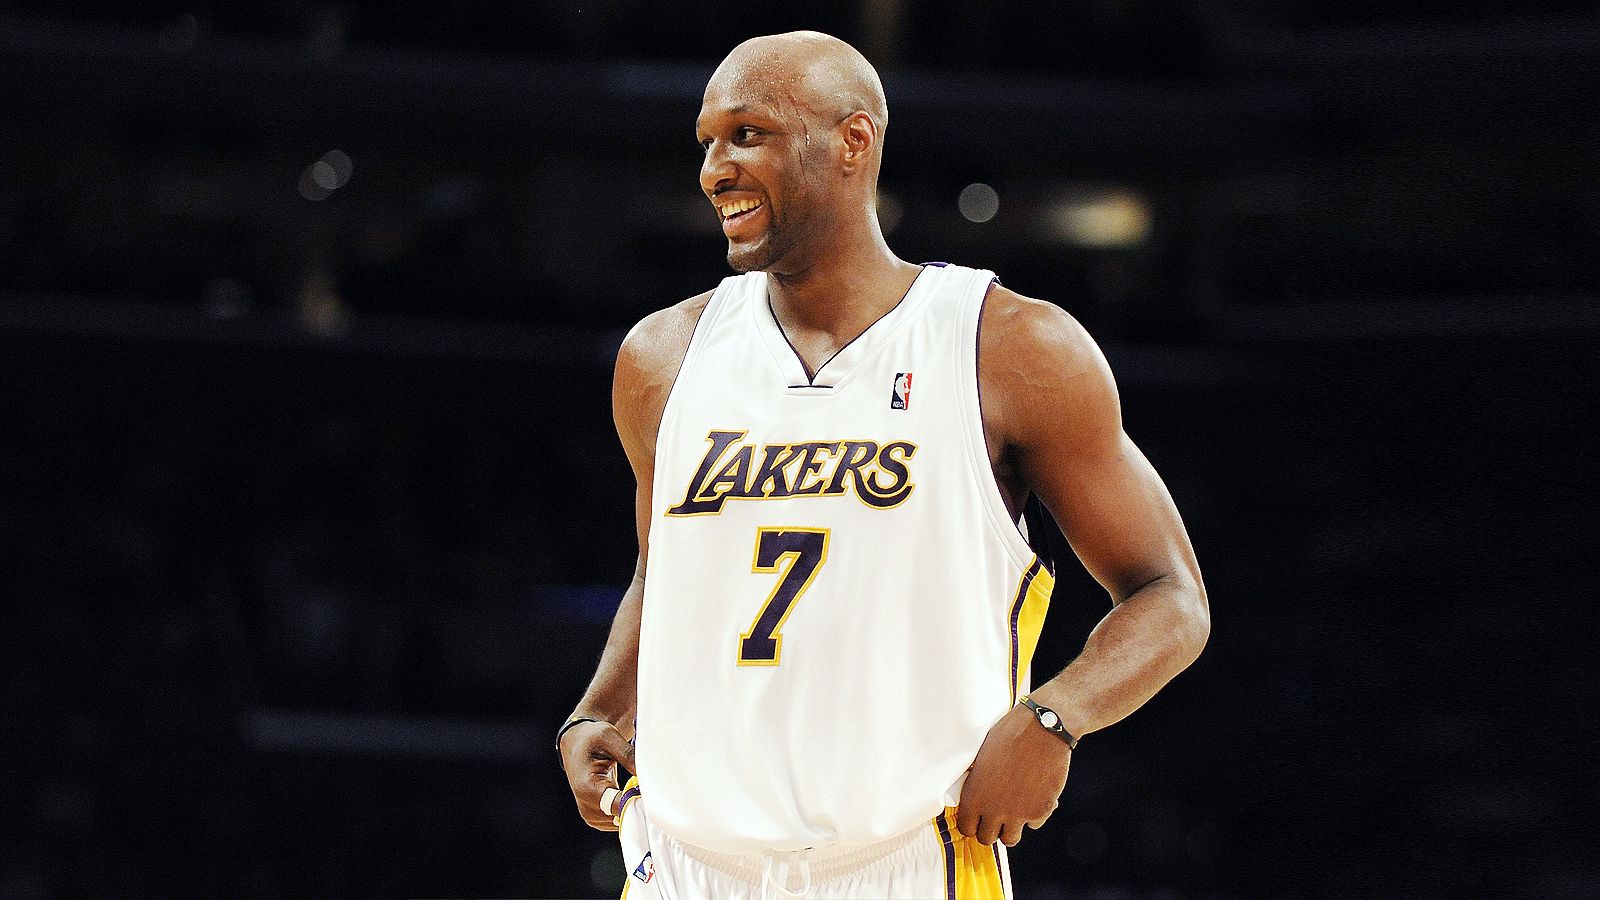 dinis conceicao recommends laila odom and lamar odom pic